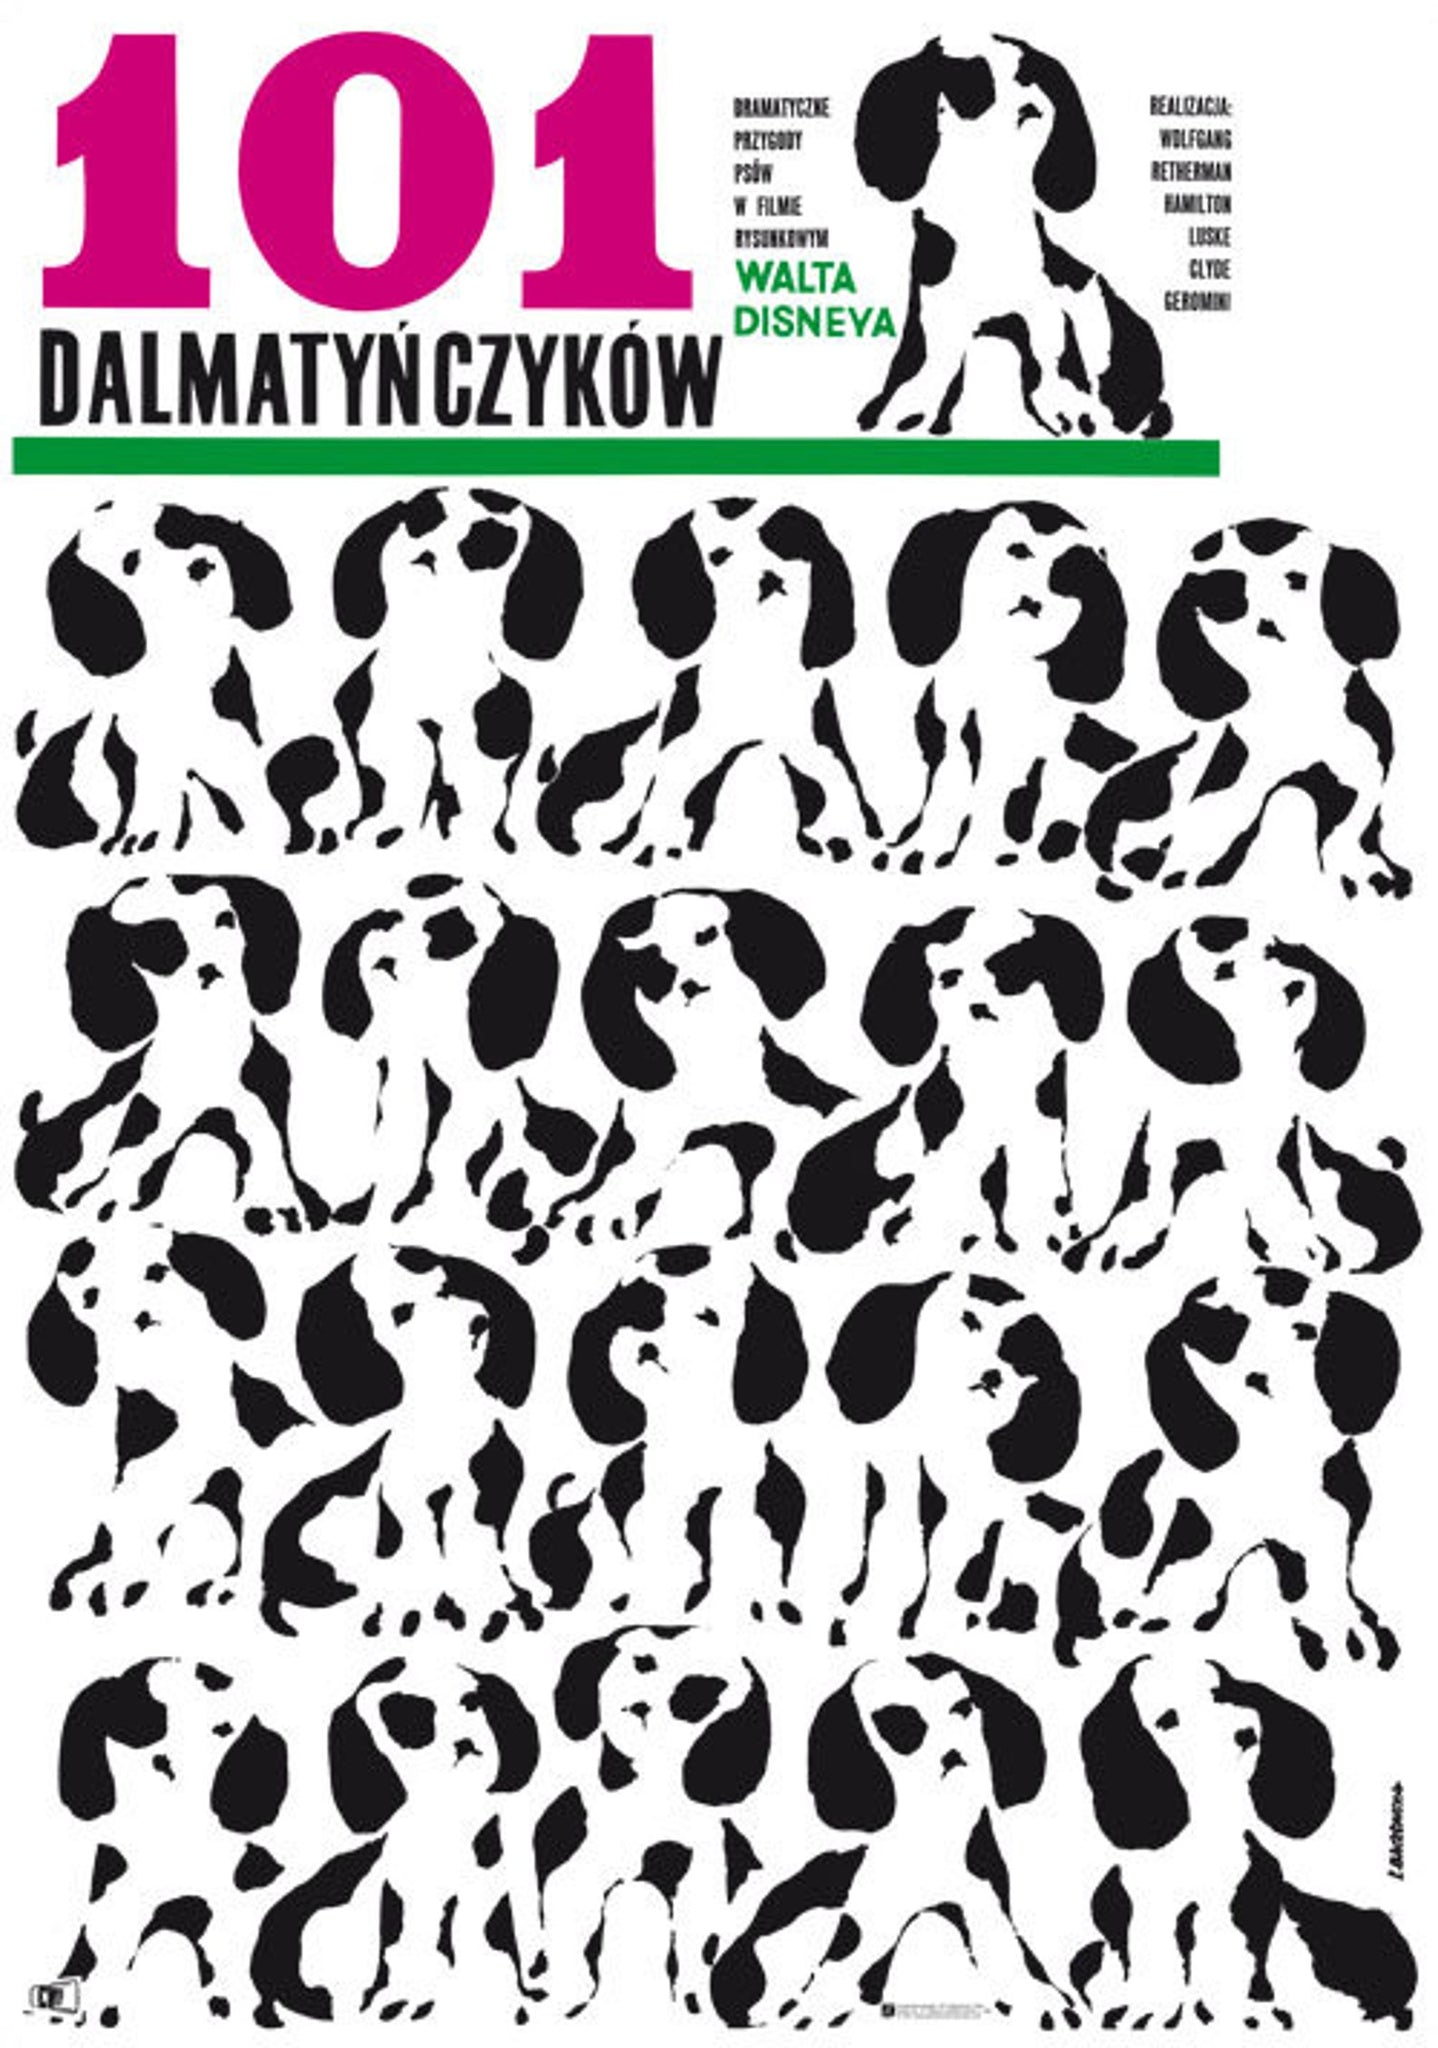 One Hundred and One Dalmatians Polish Movie Art Poster